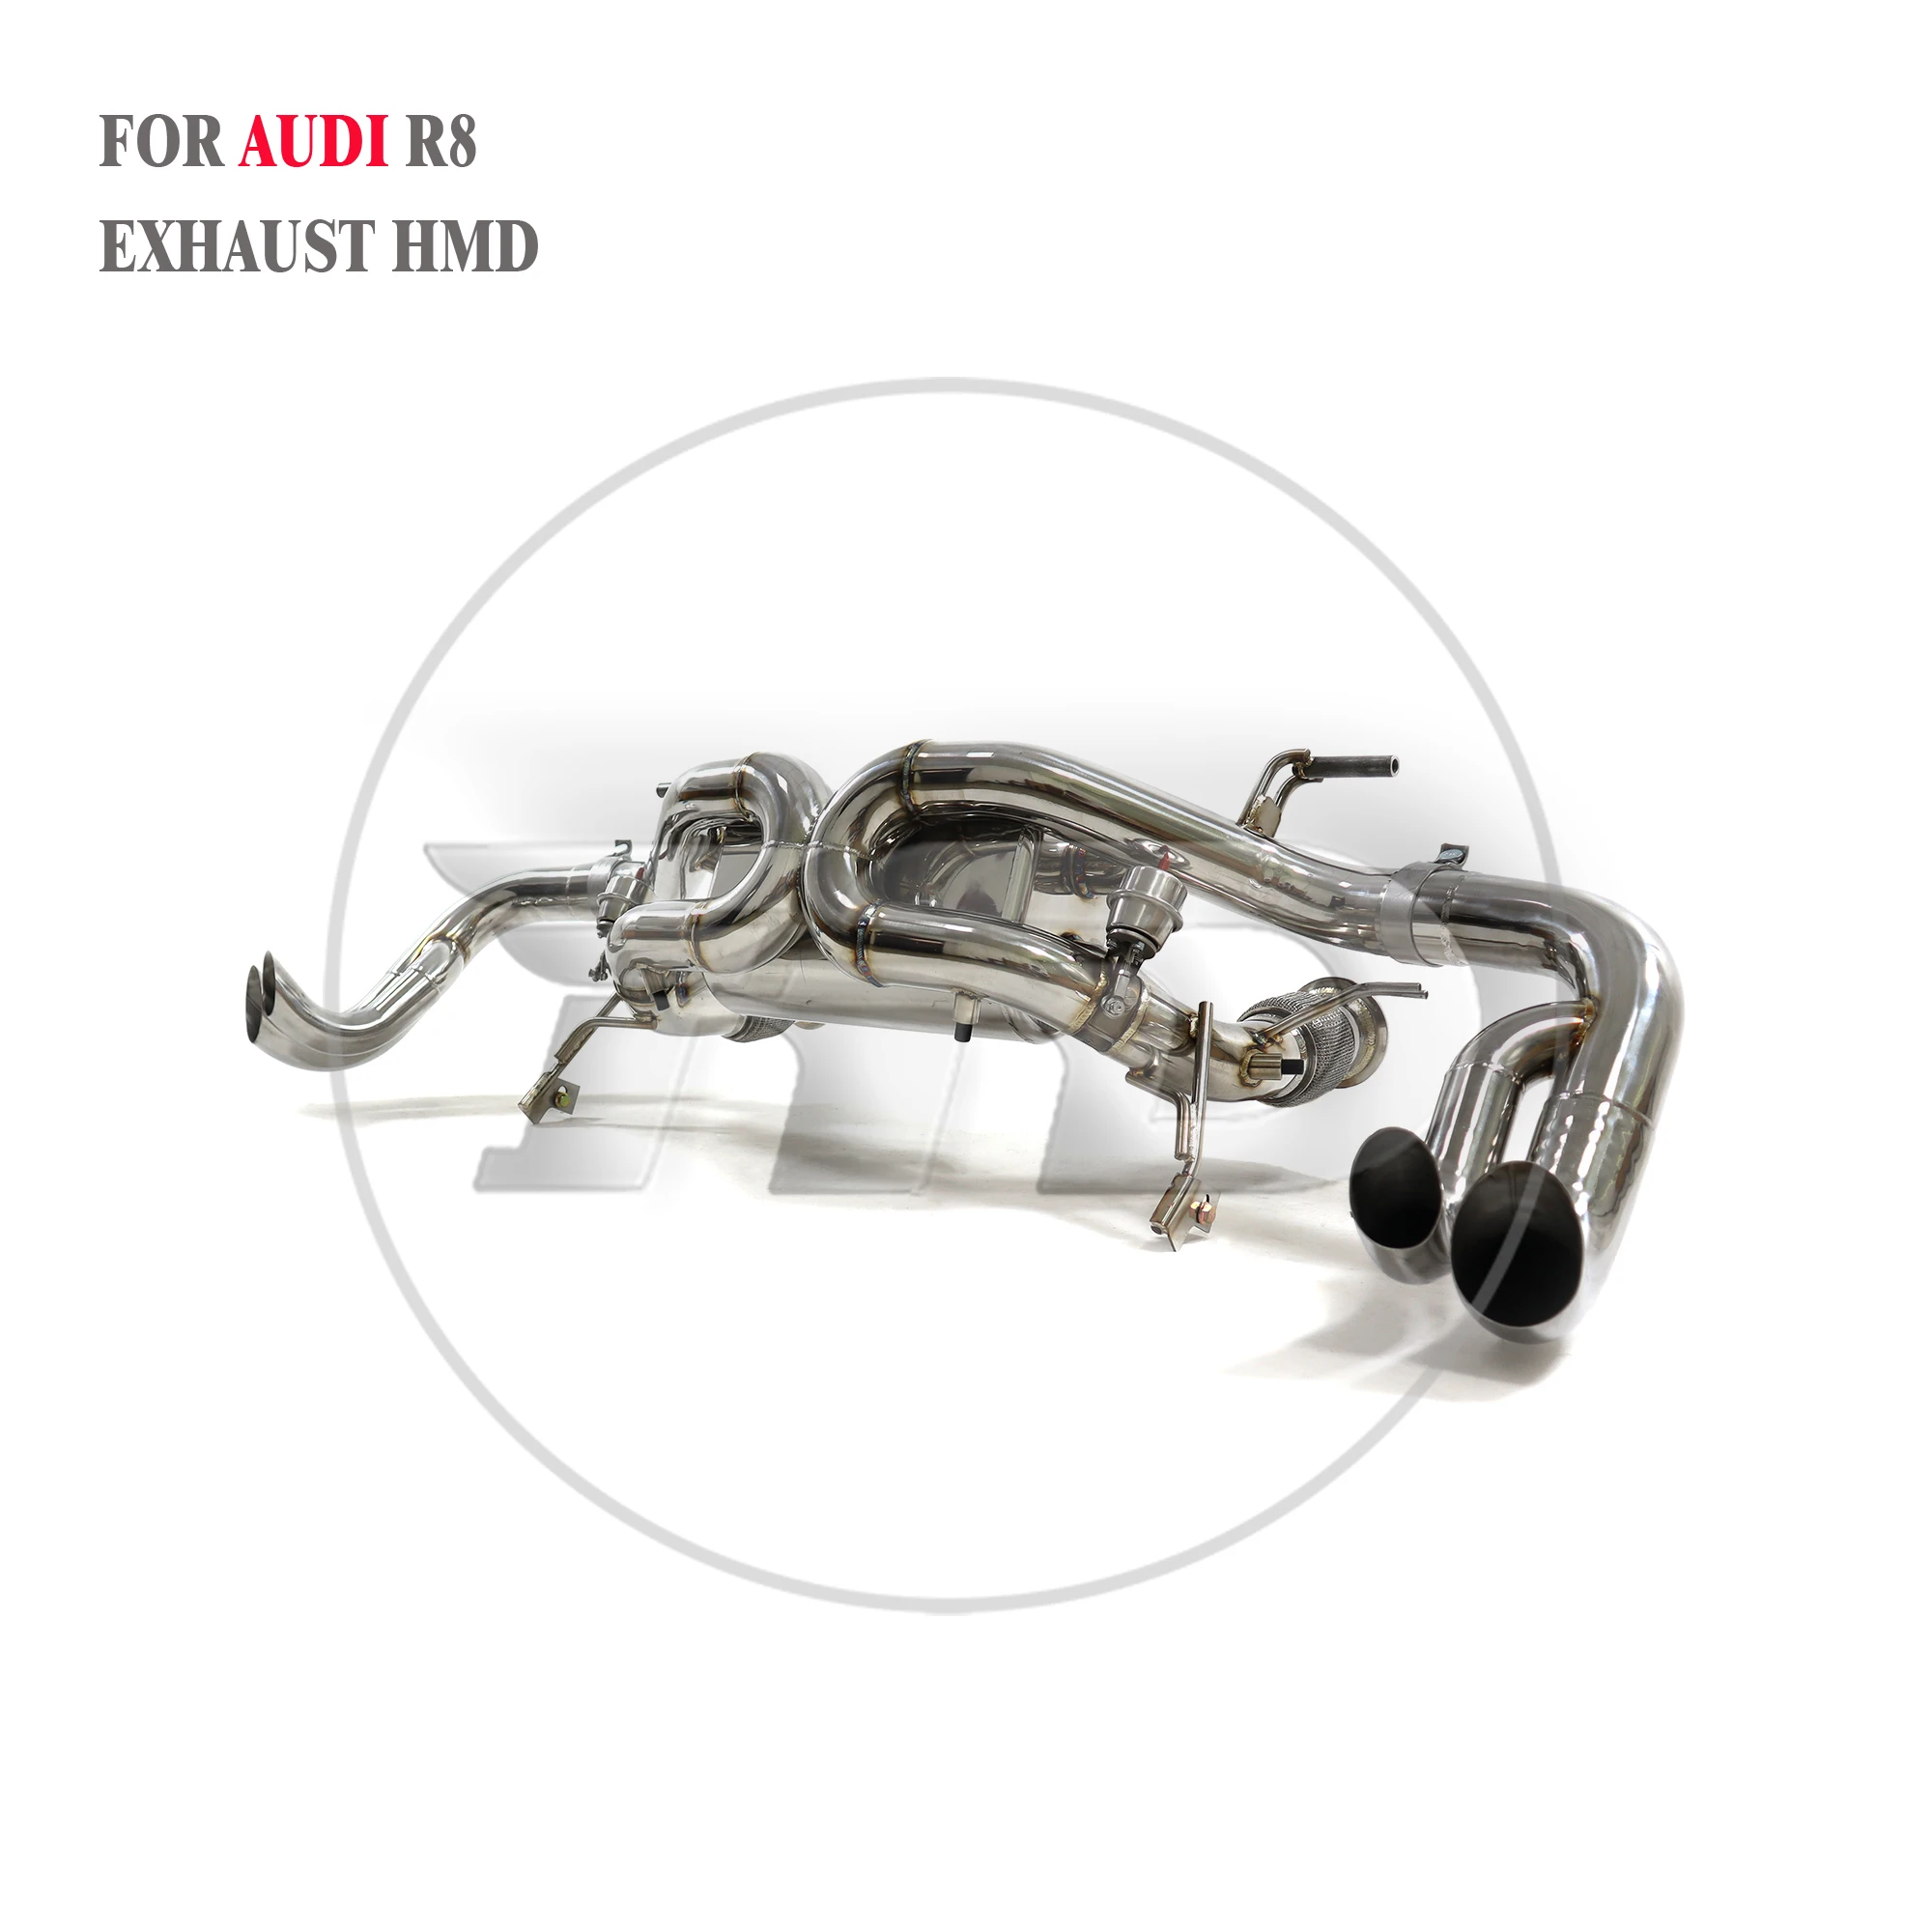 

HMD Stainless Steel Exhaust System Performance Catback For Audi R8 V10 OPF Version 2021+ Muffler With Valve